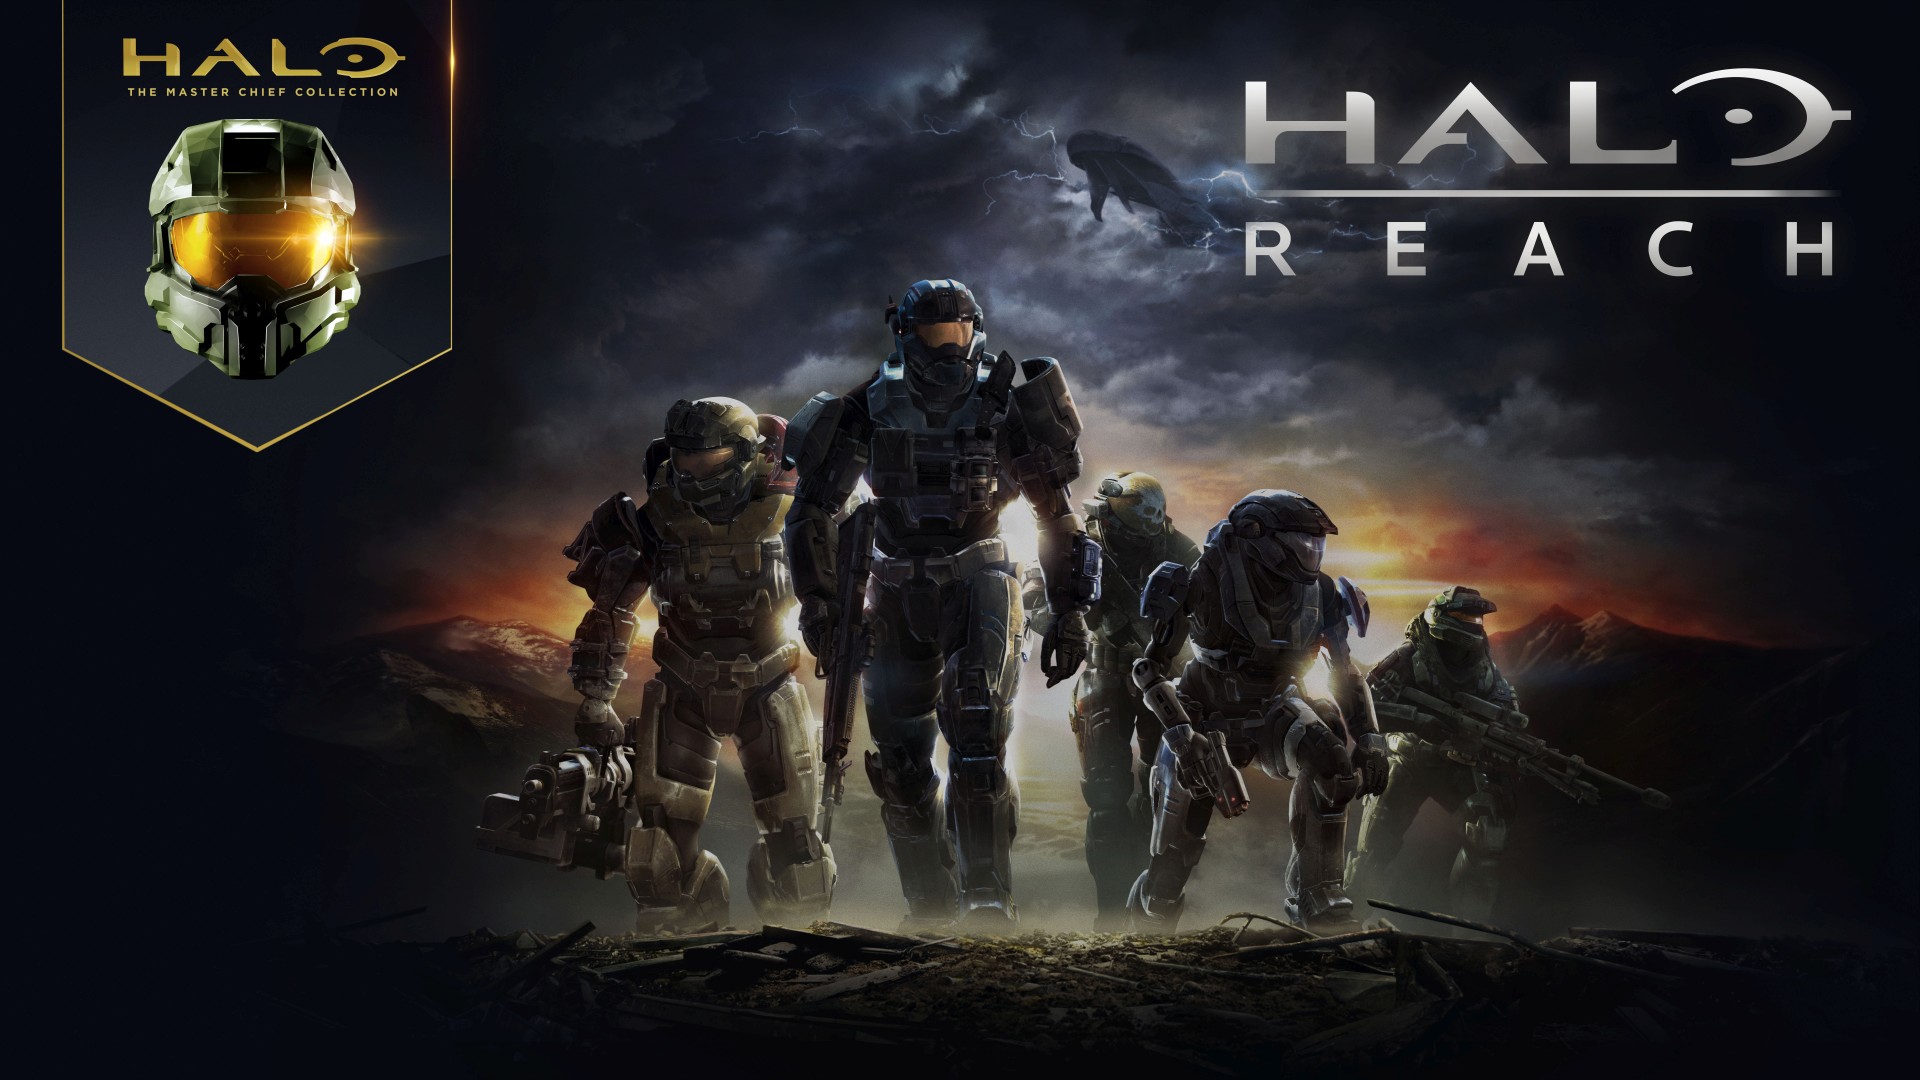 halo games xbox one